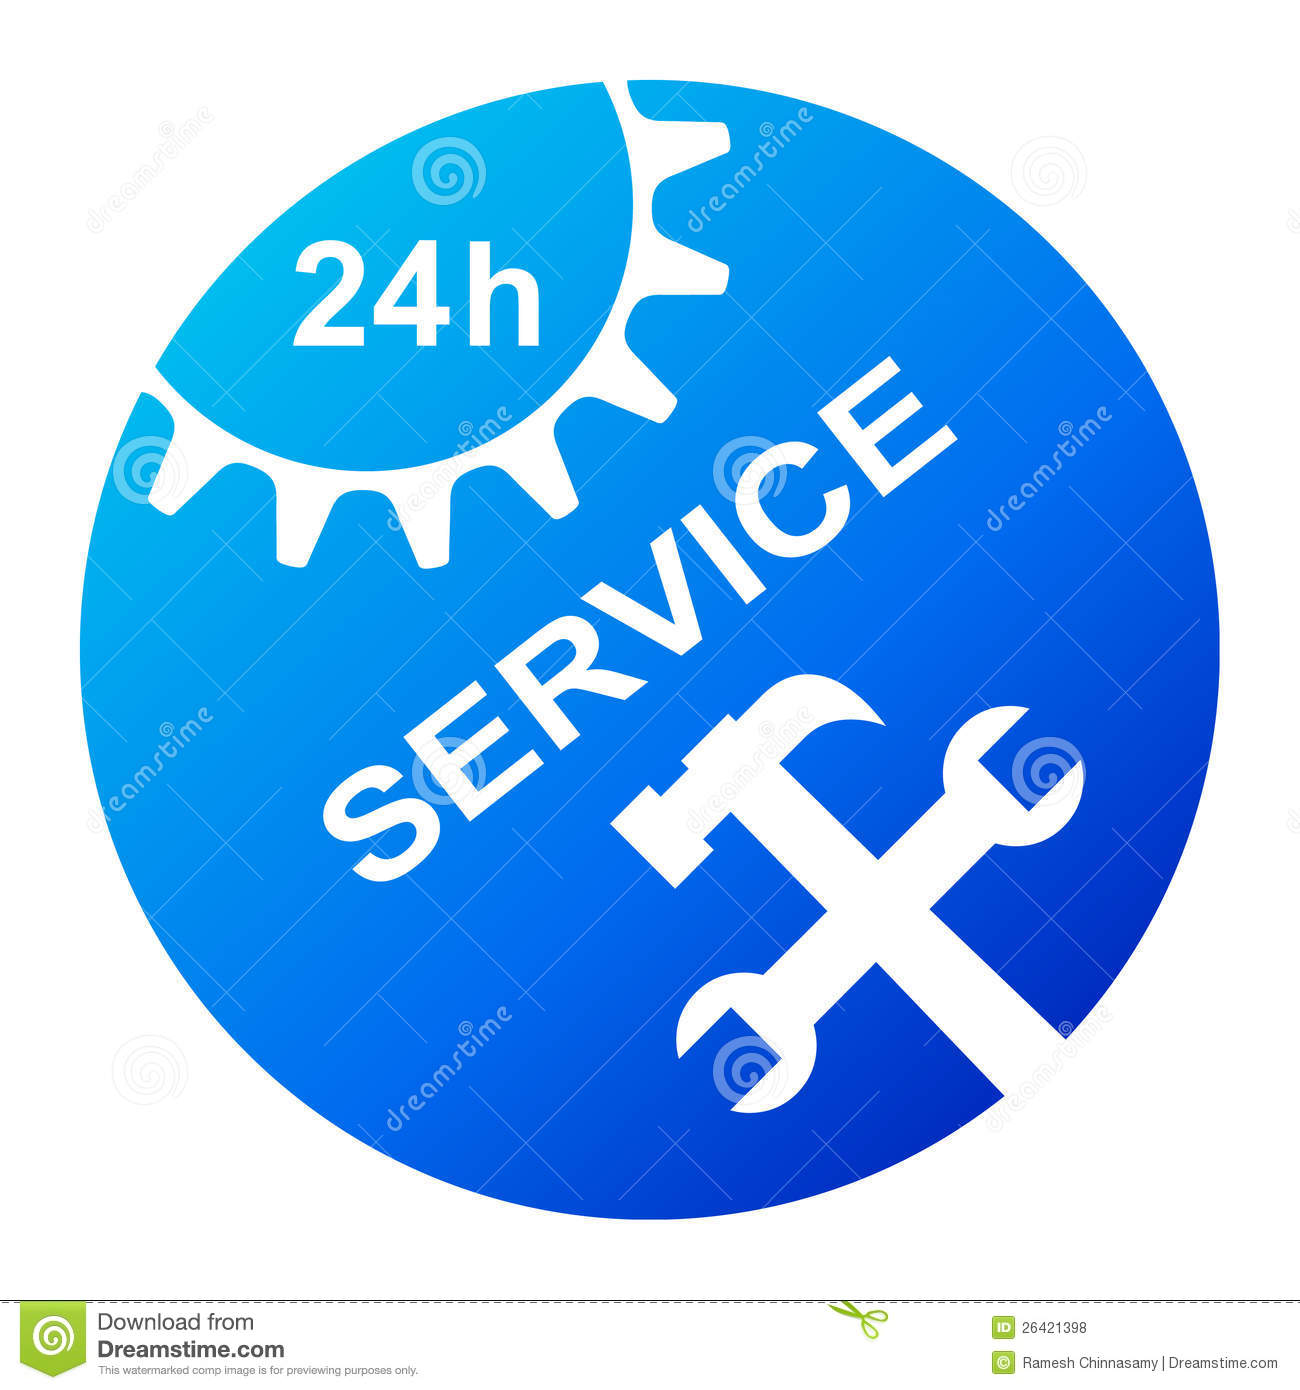 24 Hour Service Royalty Free Stock Photos   Image  26421398